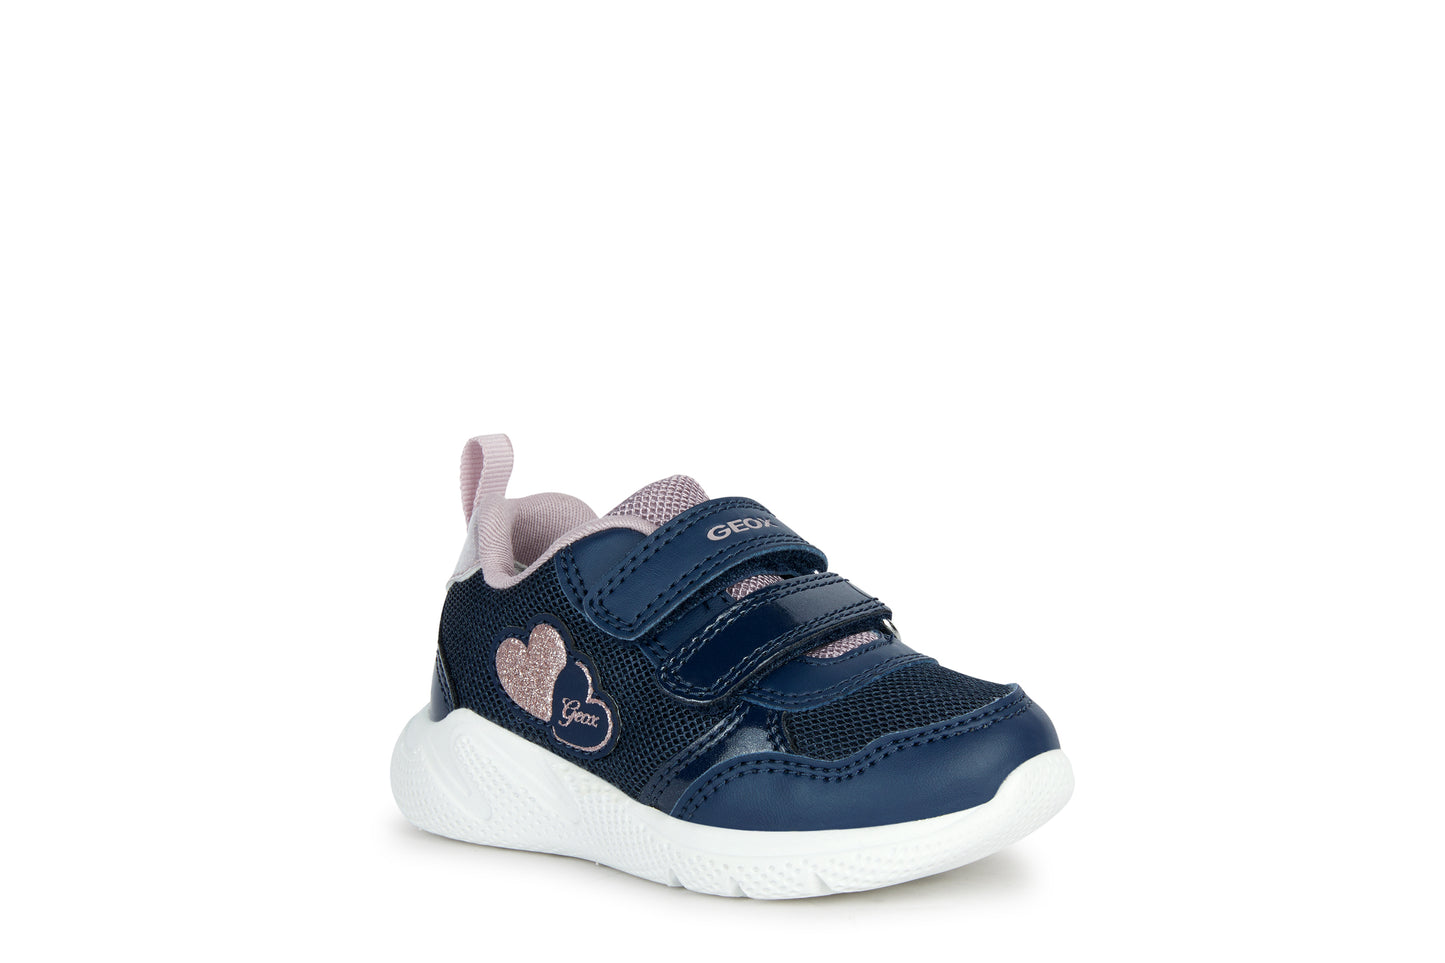 A girls trainer by Geox, style Sprintye, in navy and rose with double velcro fastening. Angled view.